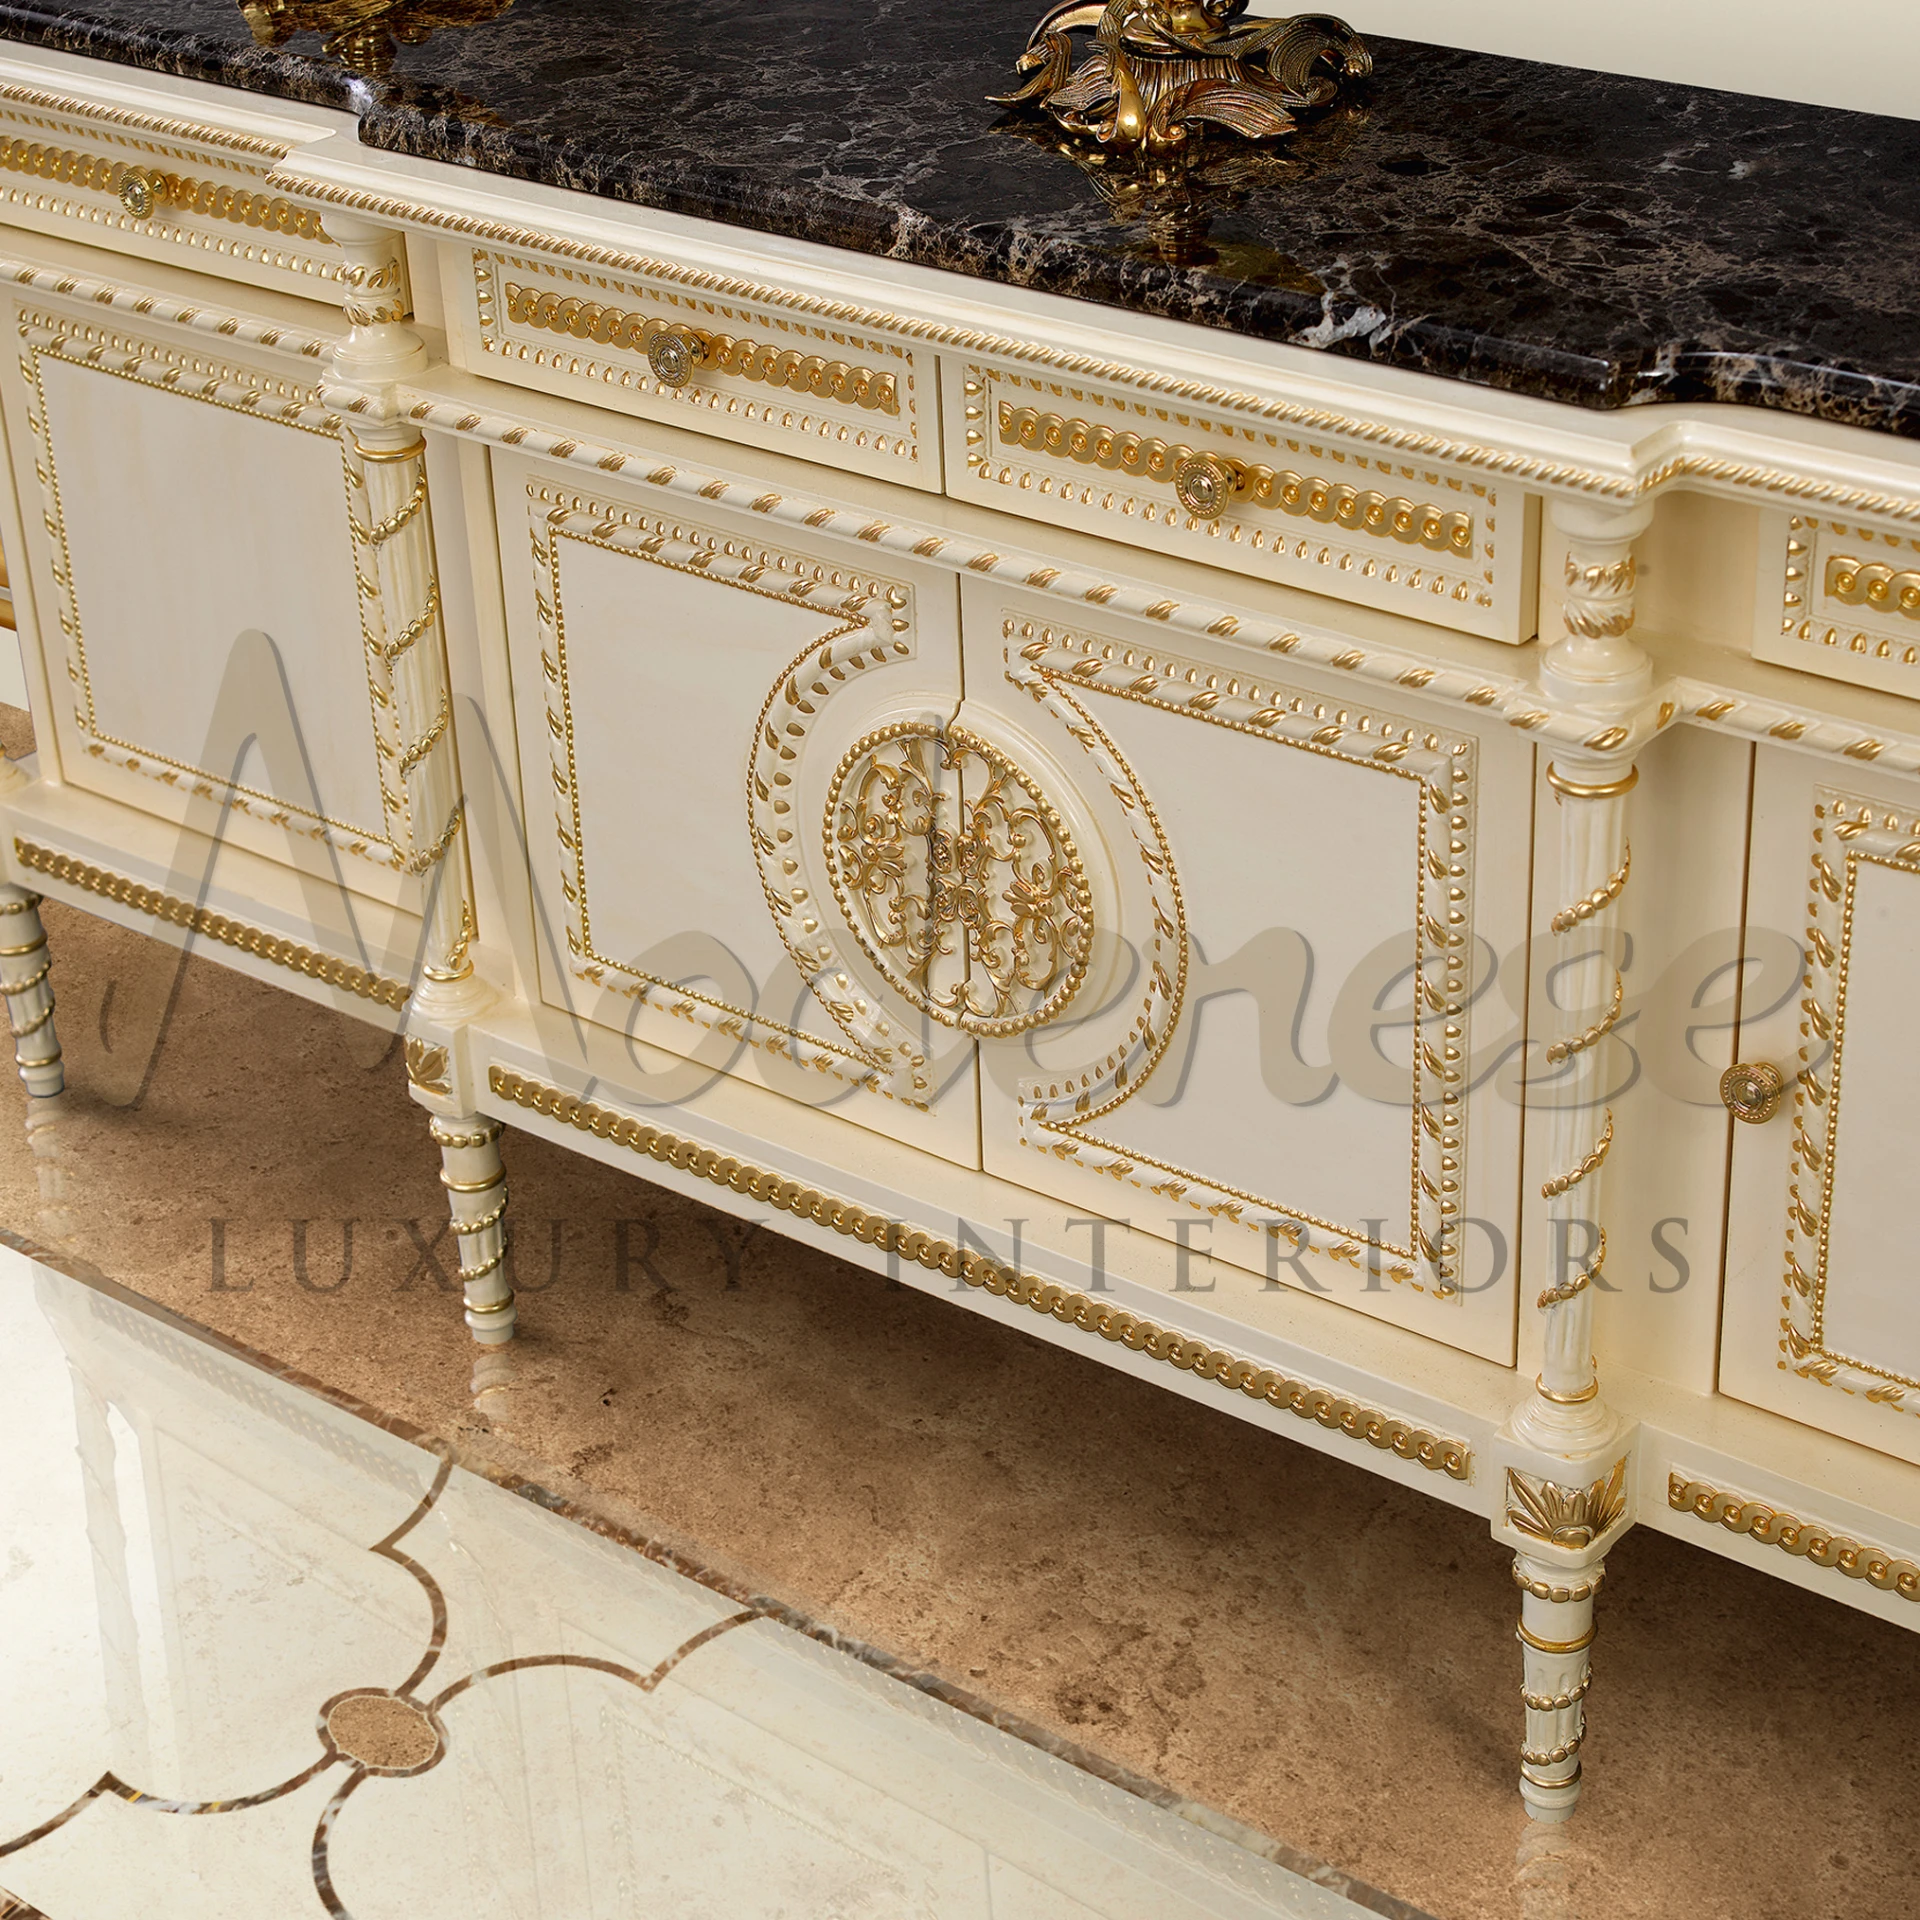 Solid wood Italian Baroque TV Stand, ivory with gold leaf accents, embodying luxury and classic interiors with timeless style.
